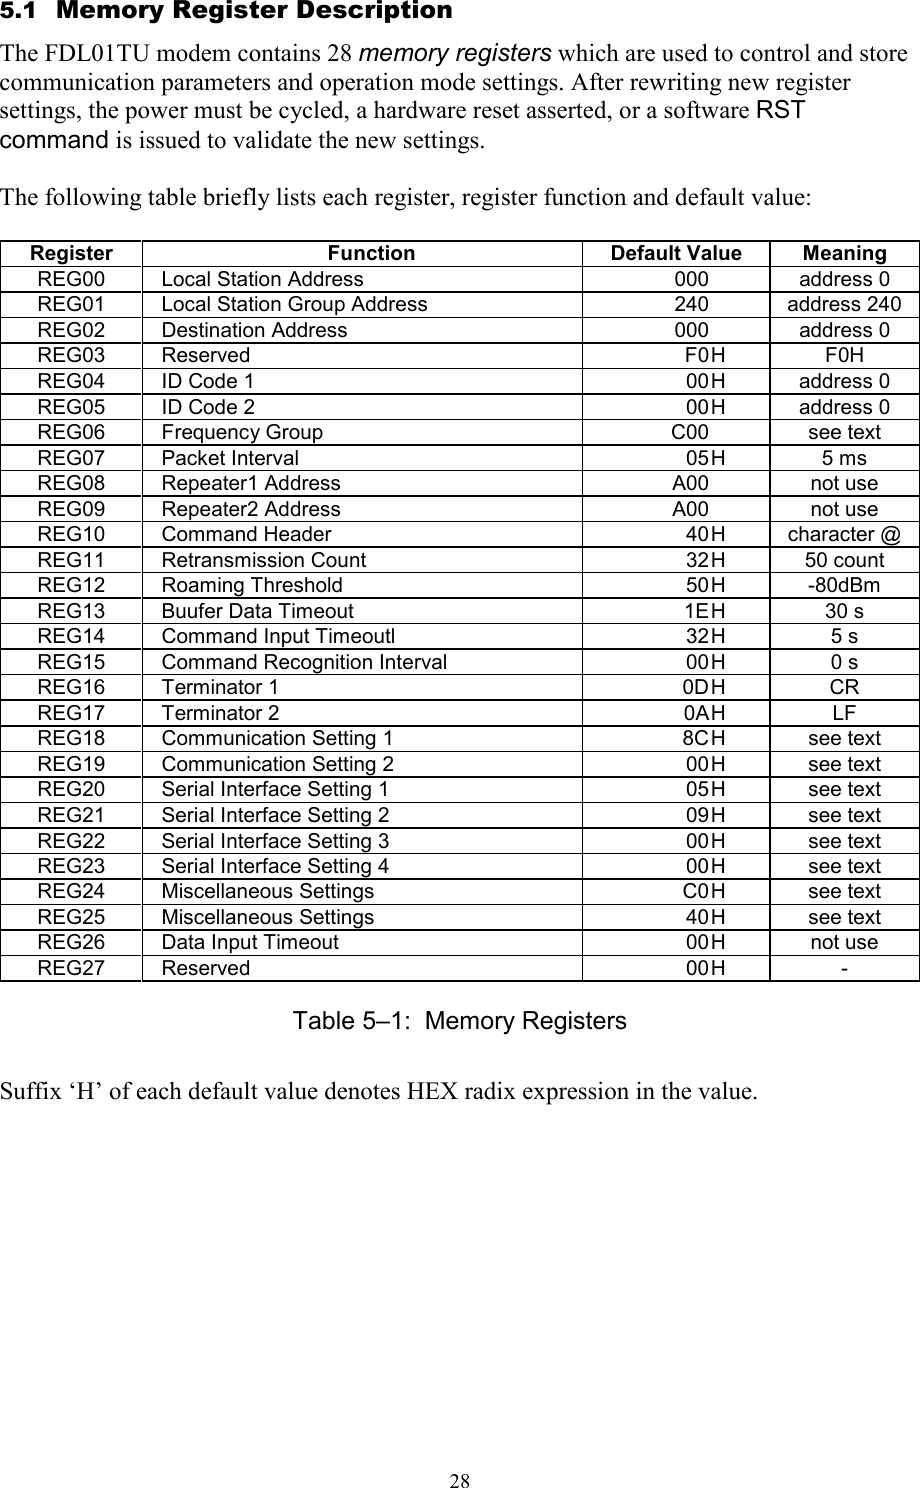   28 5.1  Memory Register Description The FDL01TU modem contains 28 memory registers which are used to control and store communication parameters and operation mode settings. After rewriting new register settings, the power must be cycled, a hardware reset asserted, or a software RST command is issued to validate the new settings.  The following table briefly lists each register, register function and default value:  Register  Function  Default Value  Meaning REG00  Local Station Address  000   address 0 REG01  Local Station Group Address  240   address 240 REG02  Destination Address  000   address 0 REG03  Reserved  F0 H  F0H REG04  ID Code 1  00 H  address 0 REG05  ID Code 2  00 H  address 0 REG06  Frequency Group  C00   see text REG07  Packet Interval  05 H  5 ms REG08  Repeater1 Address  A00   not use REG09  Repeater2 Address  A00   not use REG10  Command Header  40 H  character @ REG11  Retransmission Count  32 H  50 count REG12  Roaming Threshold  50 H  -80dBm REG13  Buufer Data Timeout  1E H  30 s REG14  Command Input Timeoutl  32 H  5 s REG15  Command Recognition Interval  00 H  0 s REG16  Terminator 1  0D H  CR REG17  Terminator 2  0A H  LF REG18  Communication Setting 1  8C H  see text REG19  Communication Setting 2  00 H  see text REG20  Serial Interface Setting 1  05 H  see text REG21  Serial Interface Setting 2  09 H  see text REG22  Serial Interface Setting 3  00 H  see text REG23  Serial Interface Setting 4  00 H  see text REG24  Miscellaneous Settings  C0 H  see text REG25  Miscellaneous Settings  40 H  see text REG26  Data Input Timeout  00 H  not use REG27  Reserved  00 H  - Table 5–1:  Memory Registers Suffix ‘H’ of each default value denotes HEX radix expression in the value. 